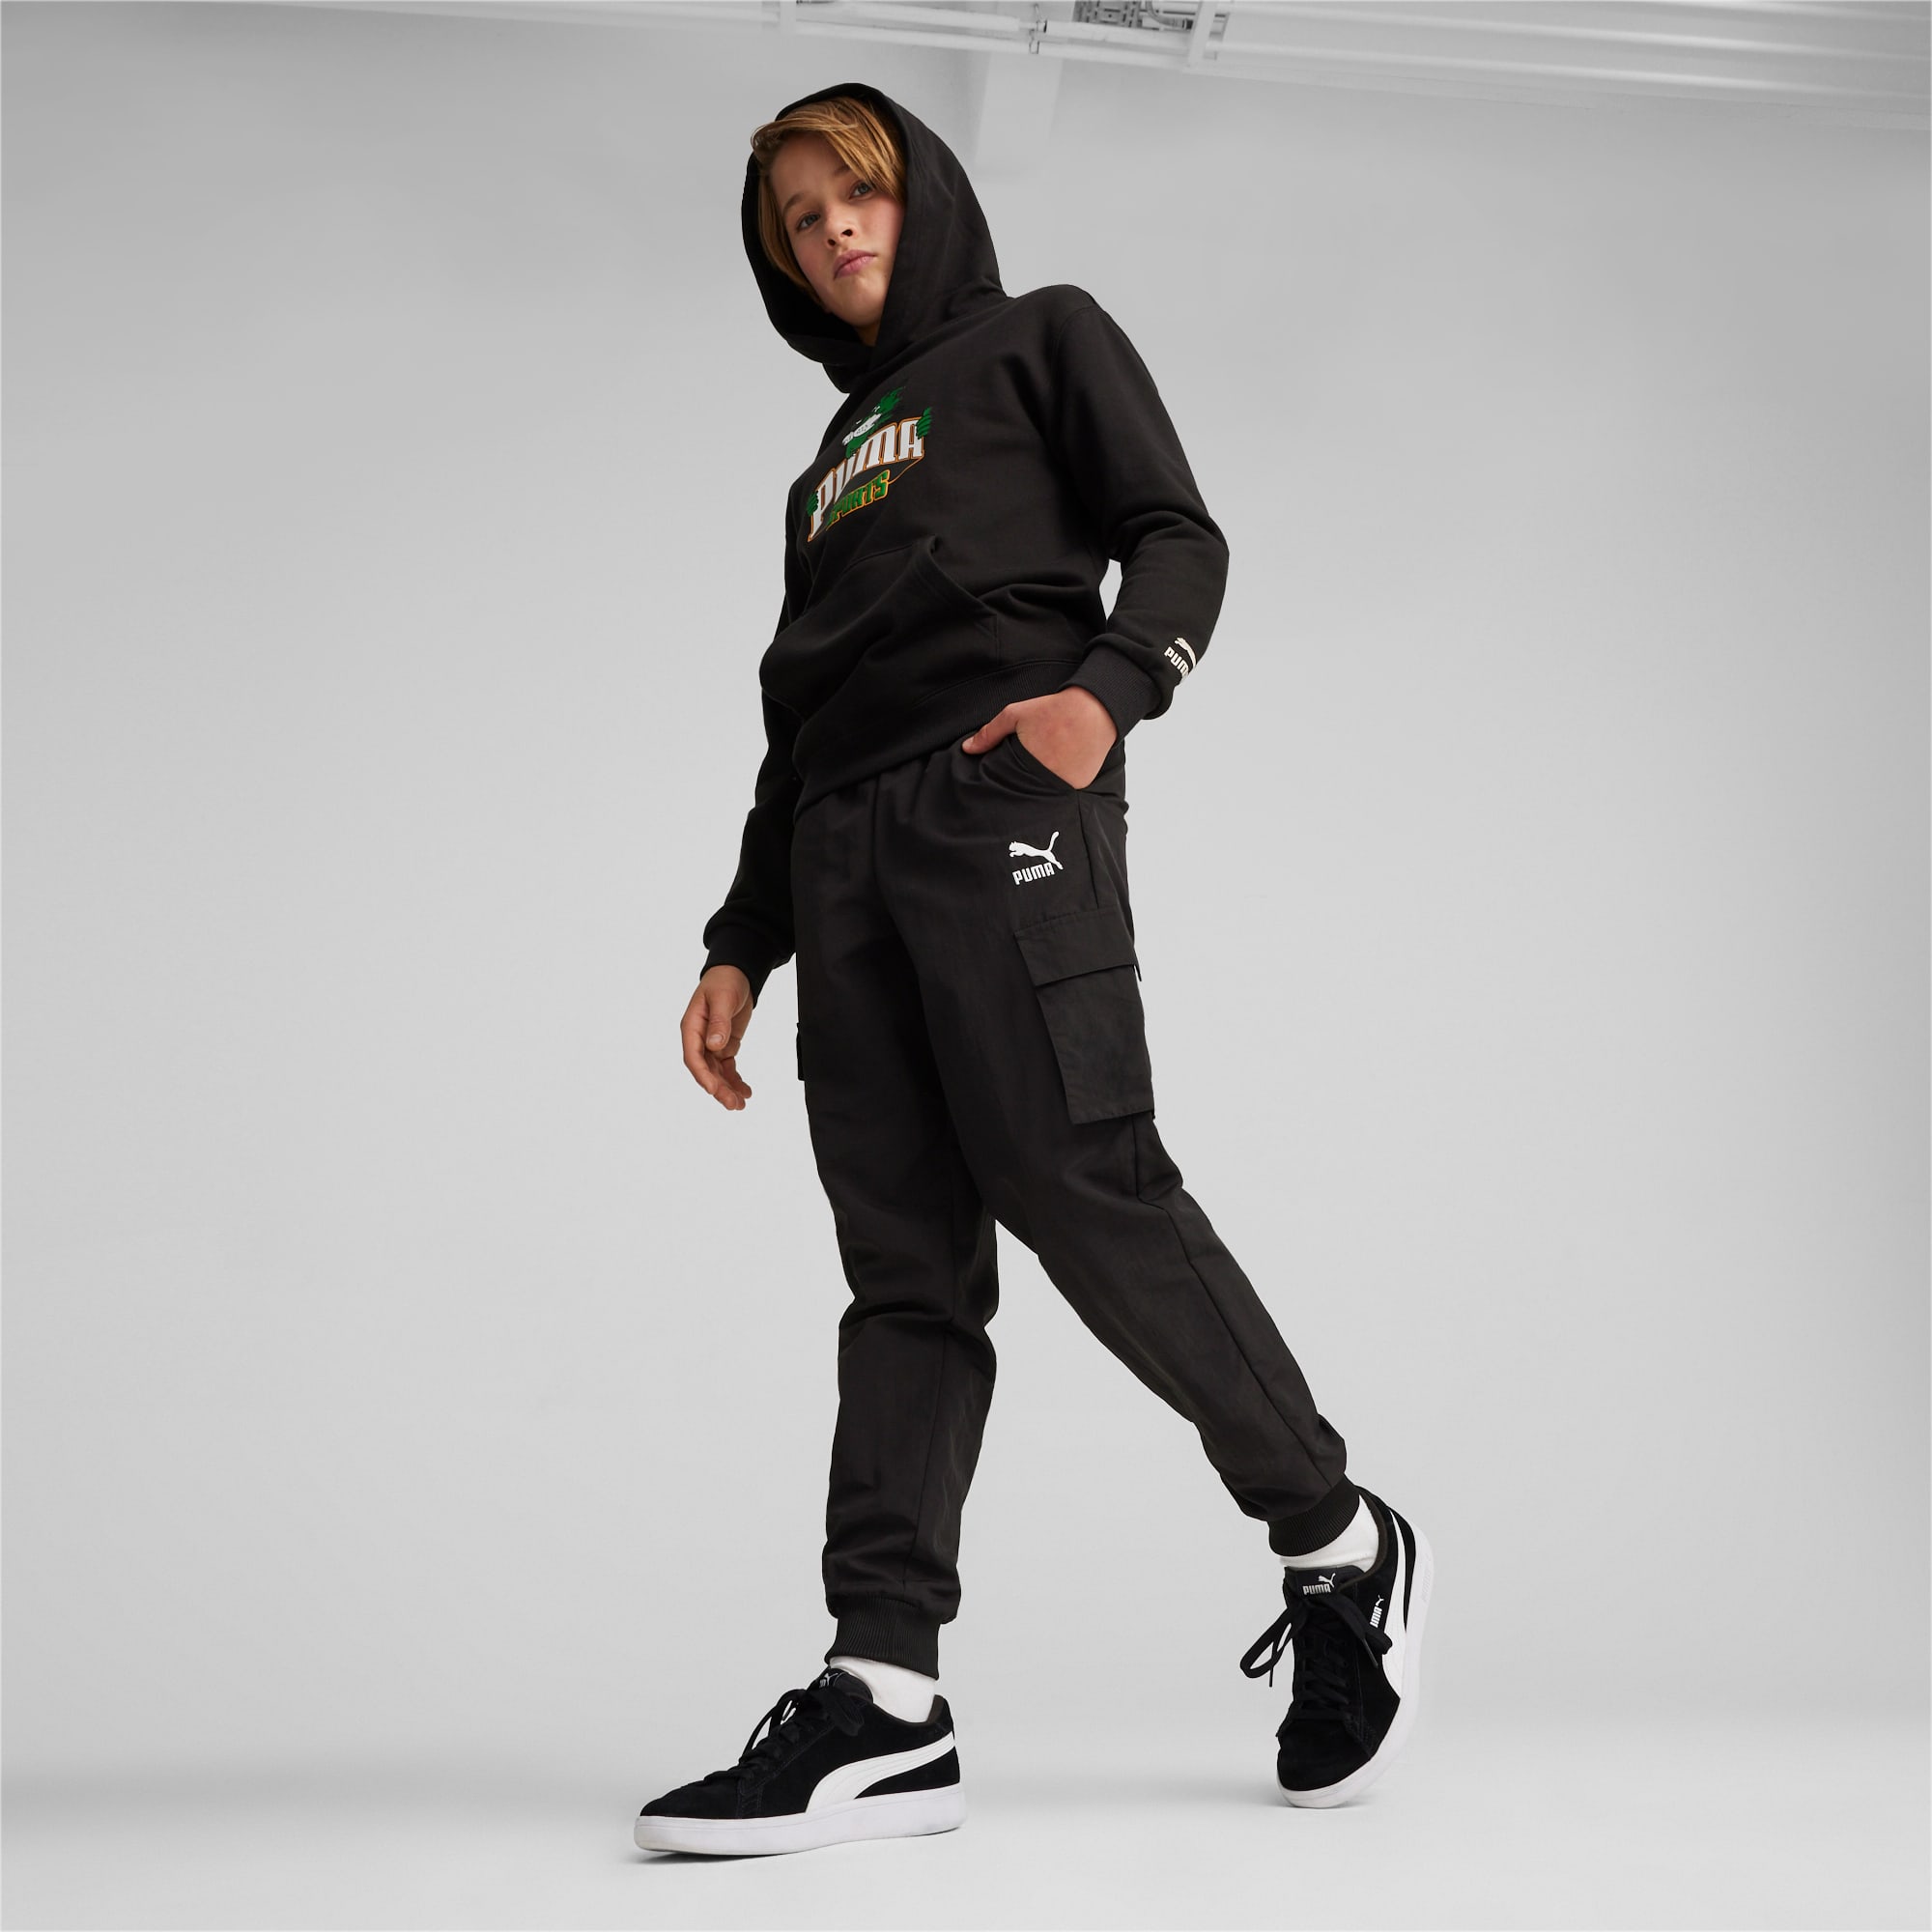 PUMA For The Fanbase Youth Hoodie, Black, Size 128, Clothing